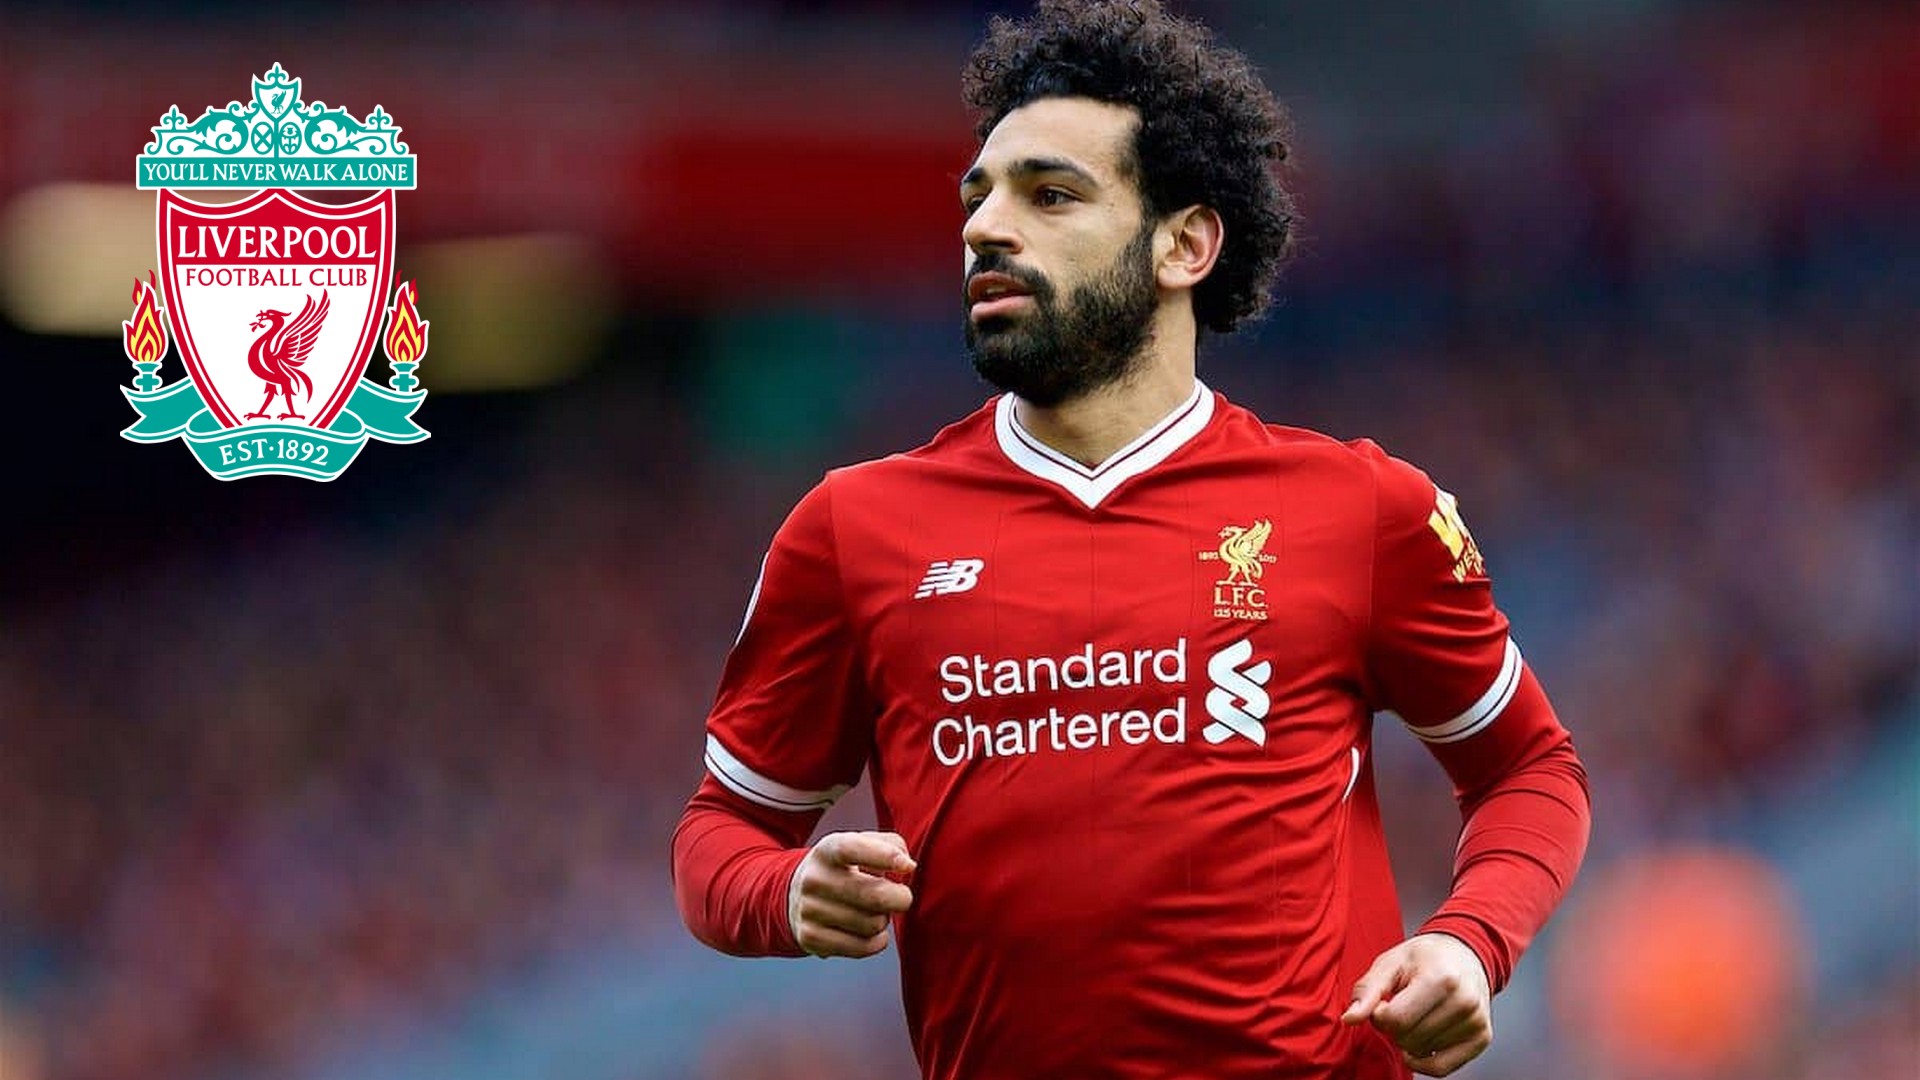 Best Mohamed Salah Wallpaper with image resolution 1920x1080 pixel. You can use this wallpaper as background for your desktop Computer Screensavers, Android or iPhone smartphones